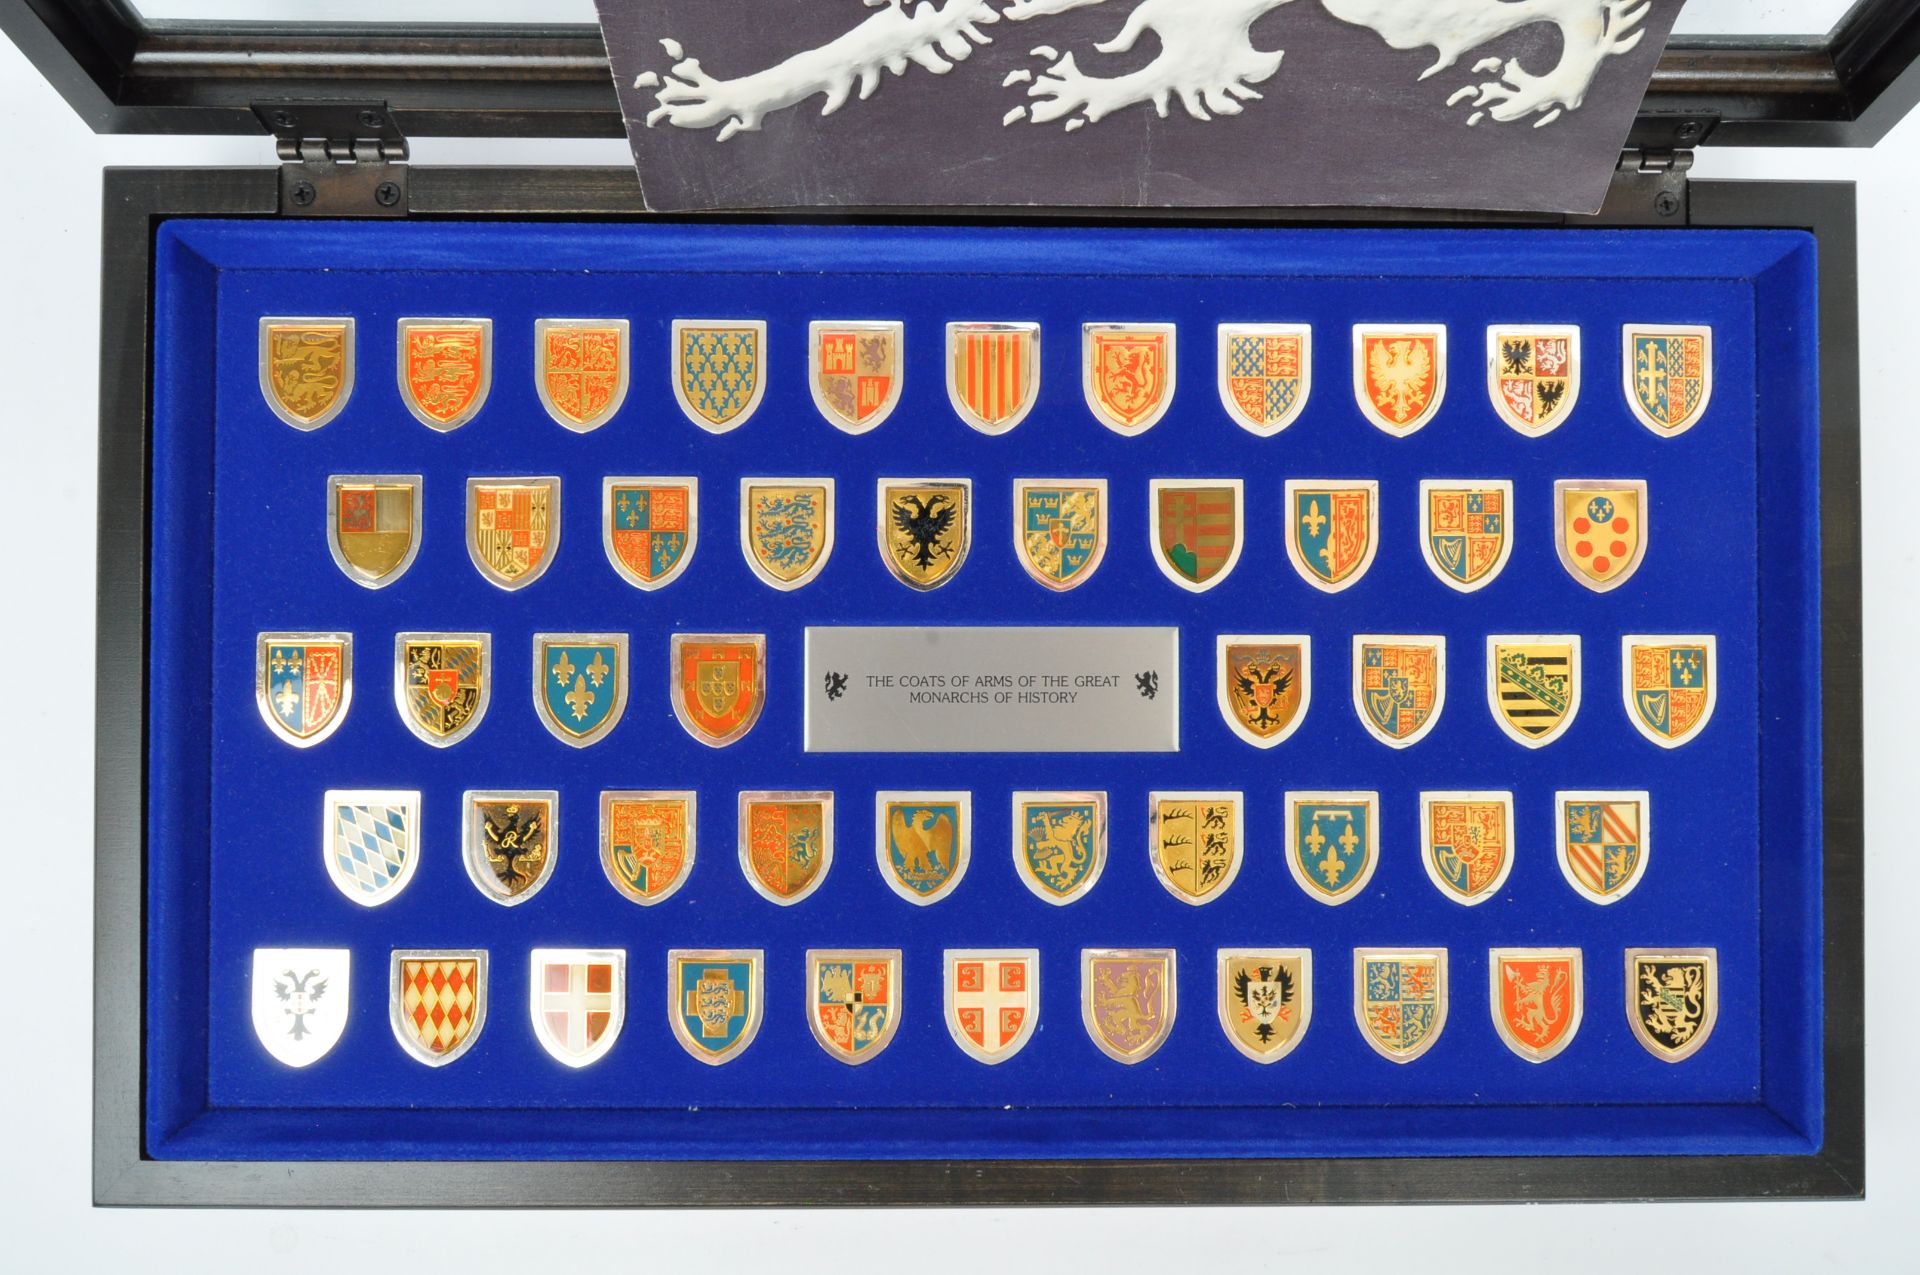 COATS OF ARMS OF GREAT MONARCHS OF HISTORY BOXED - Image 2 of 8